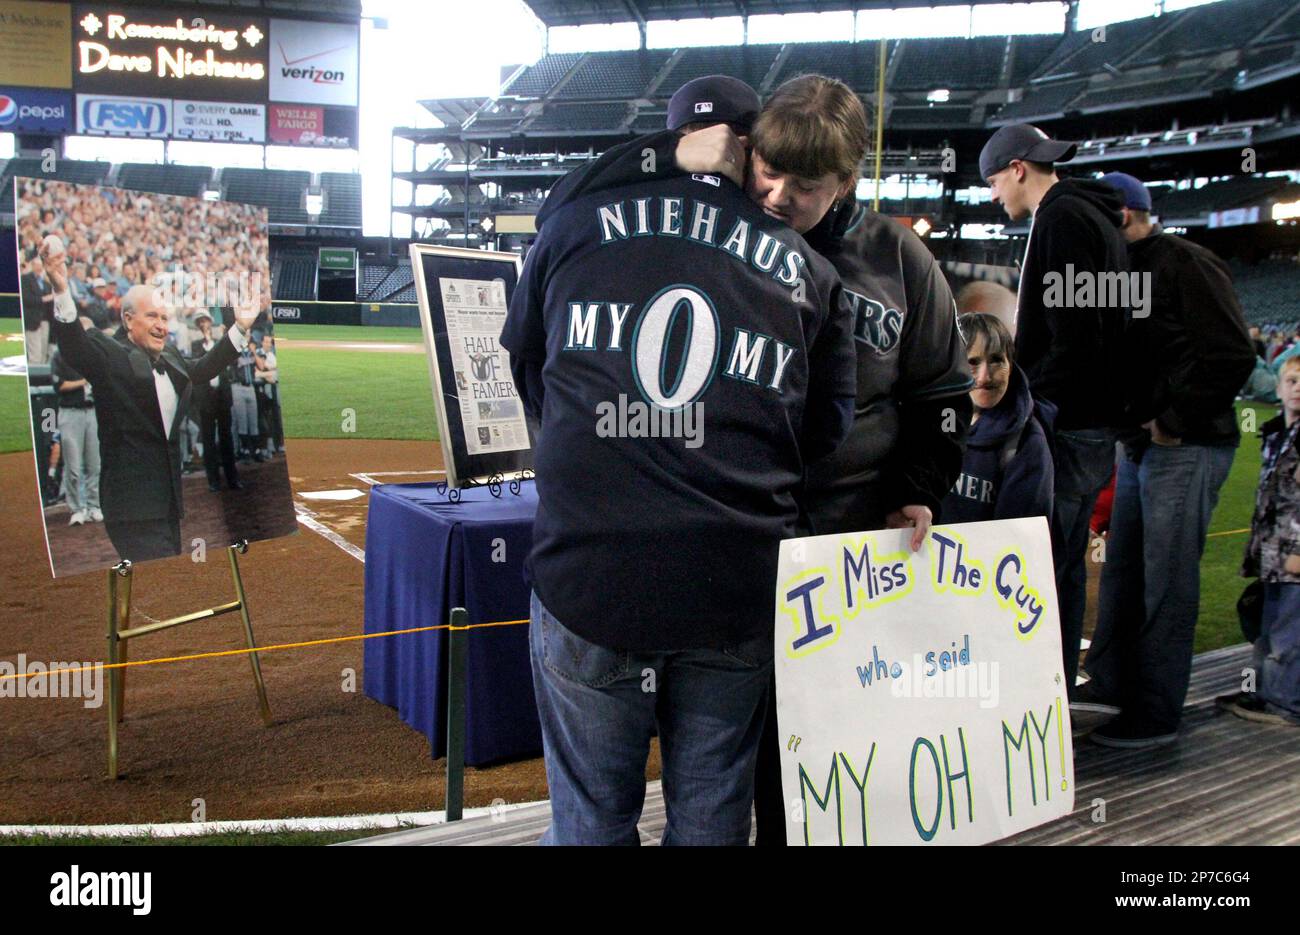 Dave Niehaus Remembrance, by Mariners PR